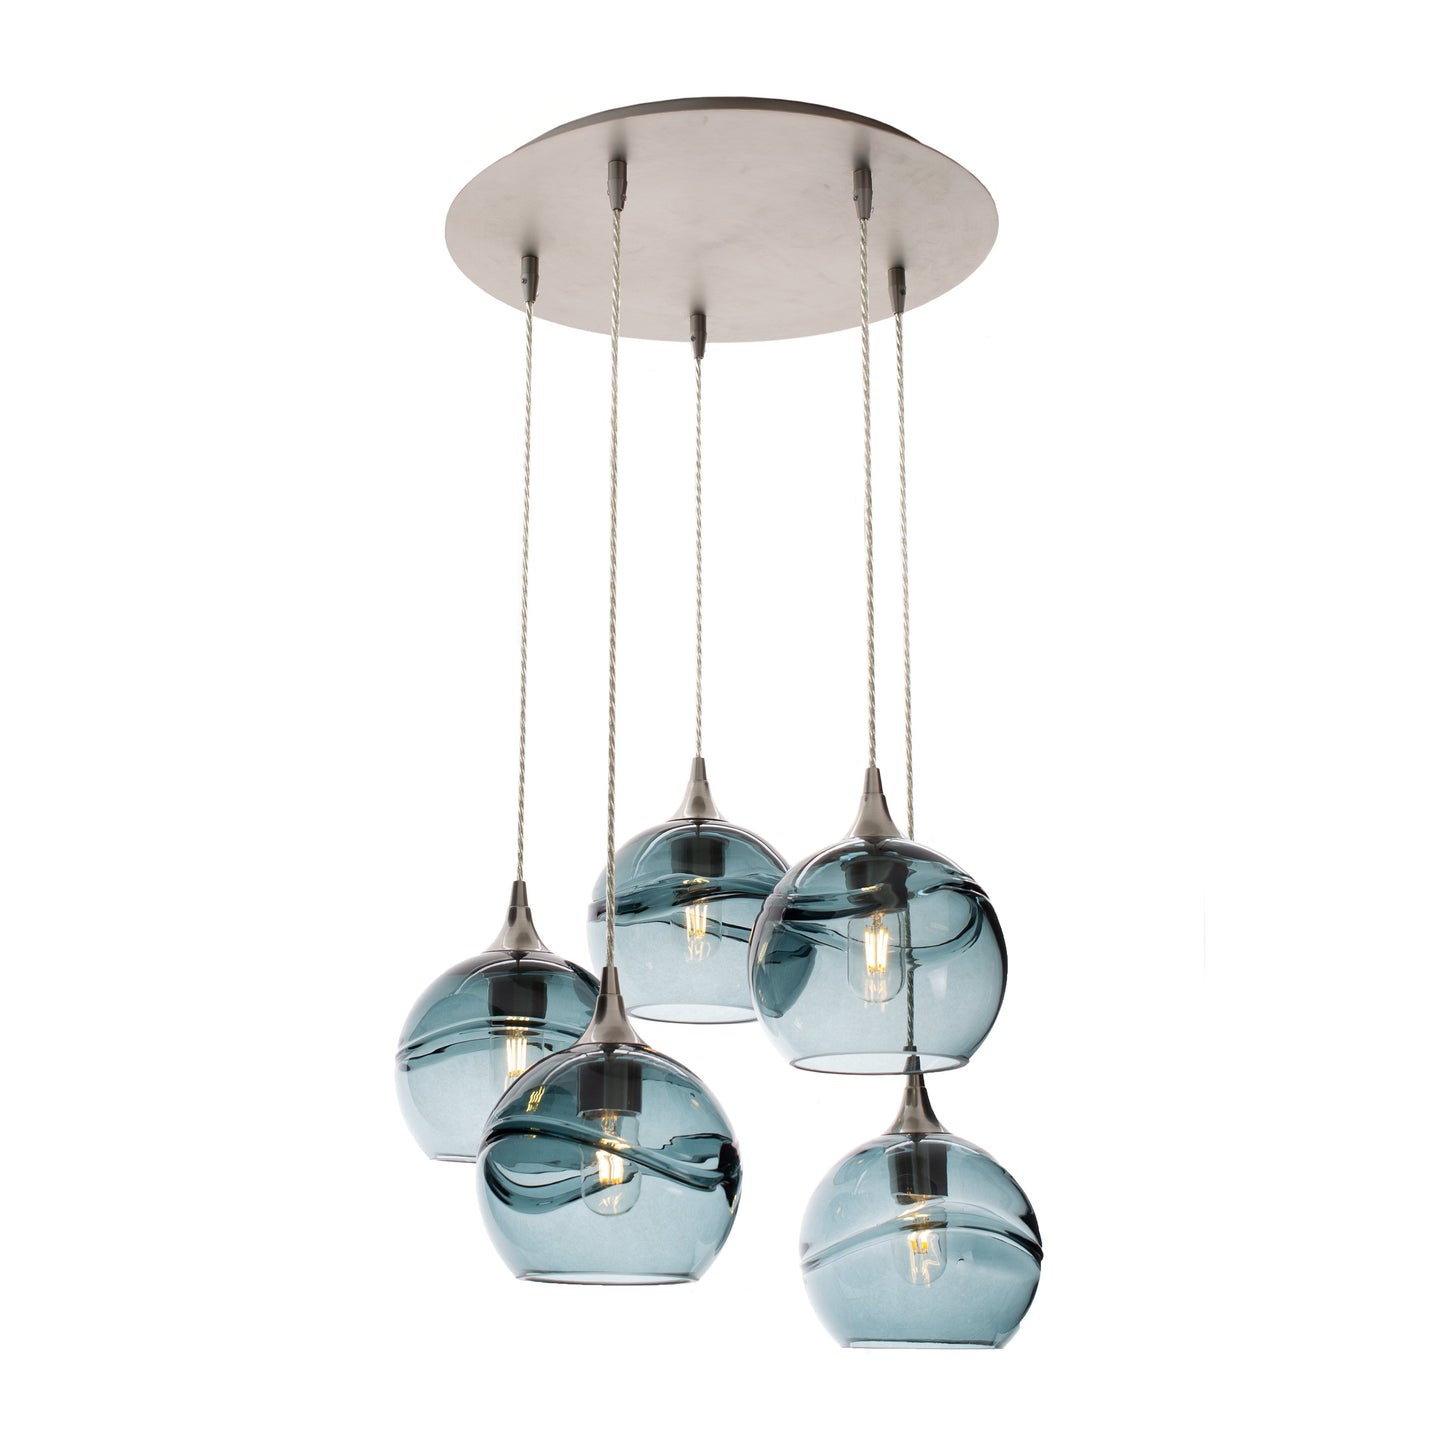 Bicycle Glass Co 767 Swell: 5 Pendant Cascade Chandelier, Slate Gray Glass, Brushed Nickel Hardware, Light Bulbs On